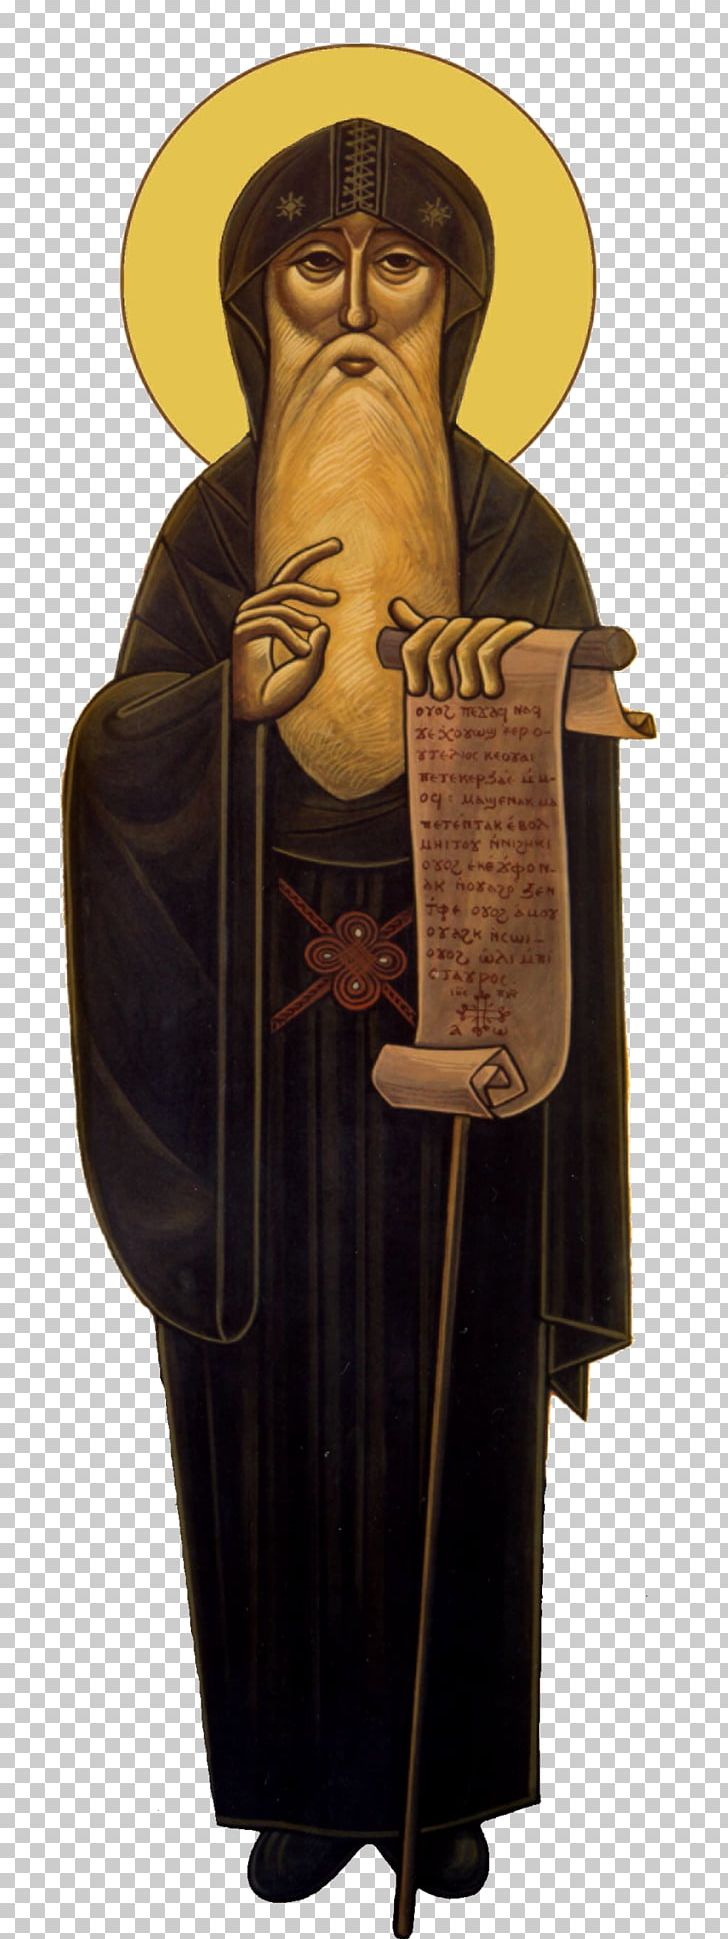 Christian Monasticism Monastery Of Saint Anthony Religion Monk Eastern Orthodox Church PNG, Clipart, Anthony Of Padua, Anthony The Great, Antony, Christian Church, Christian Monasticism Free PNG Download